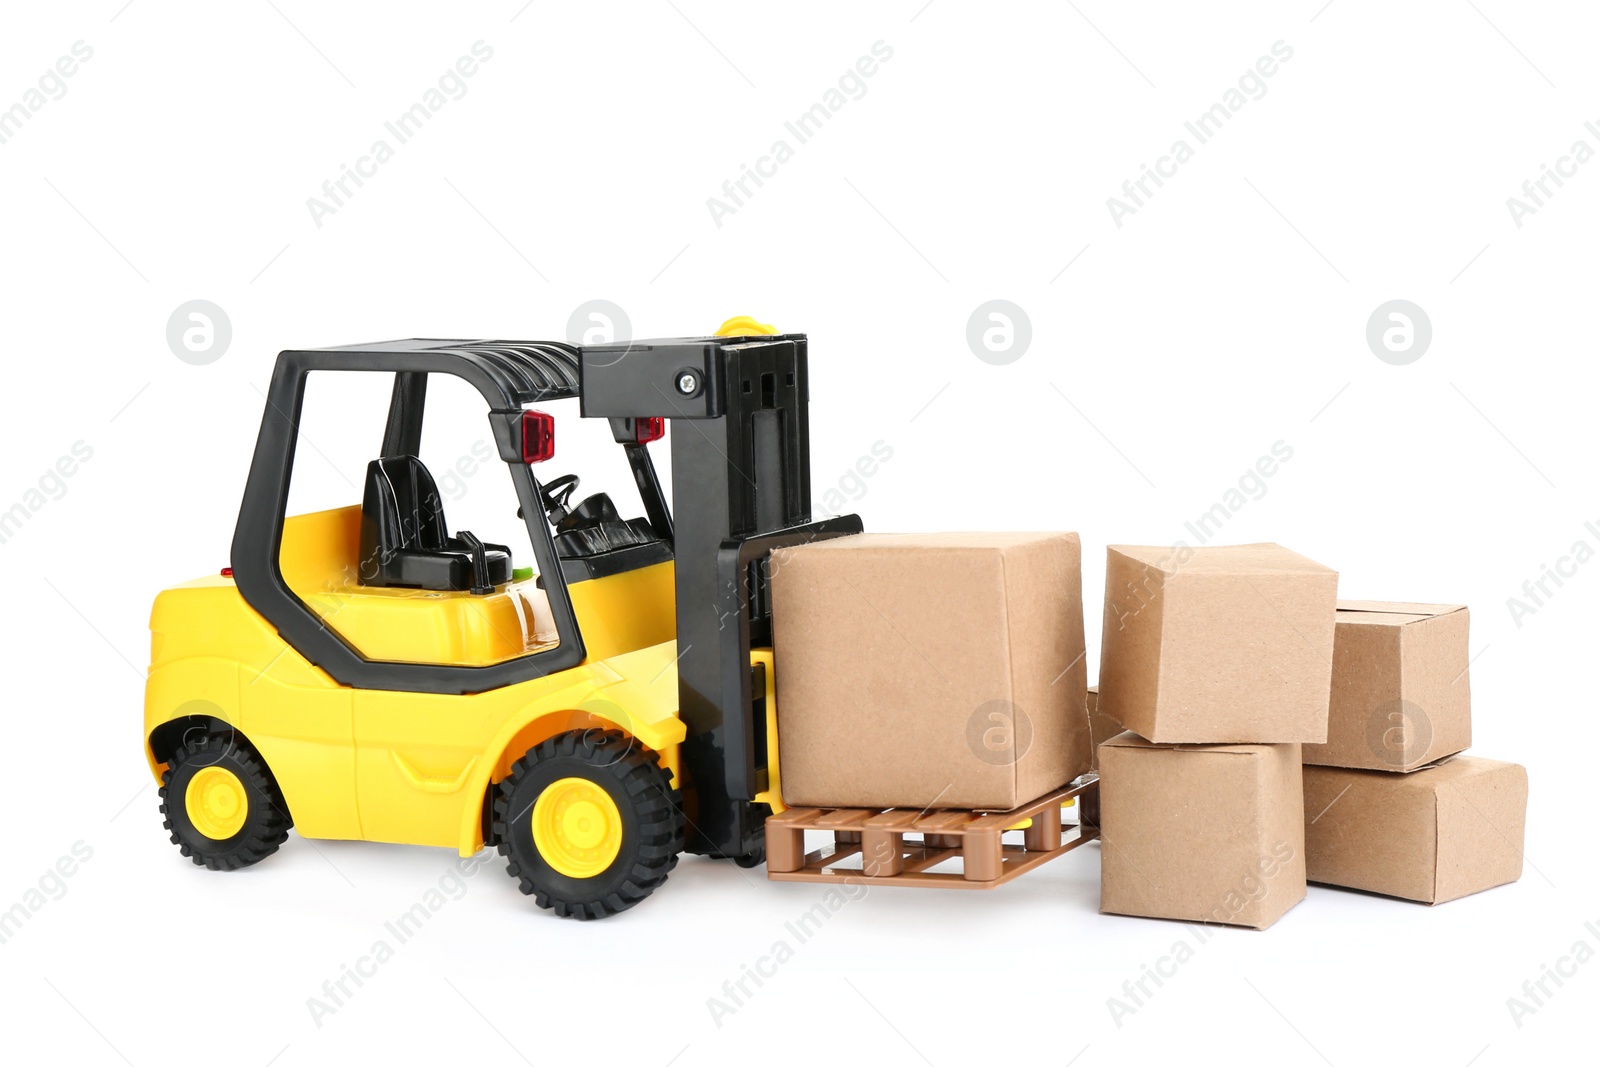 Photo of Forklift model and carton boxes on white background. Courier service